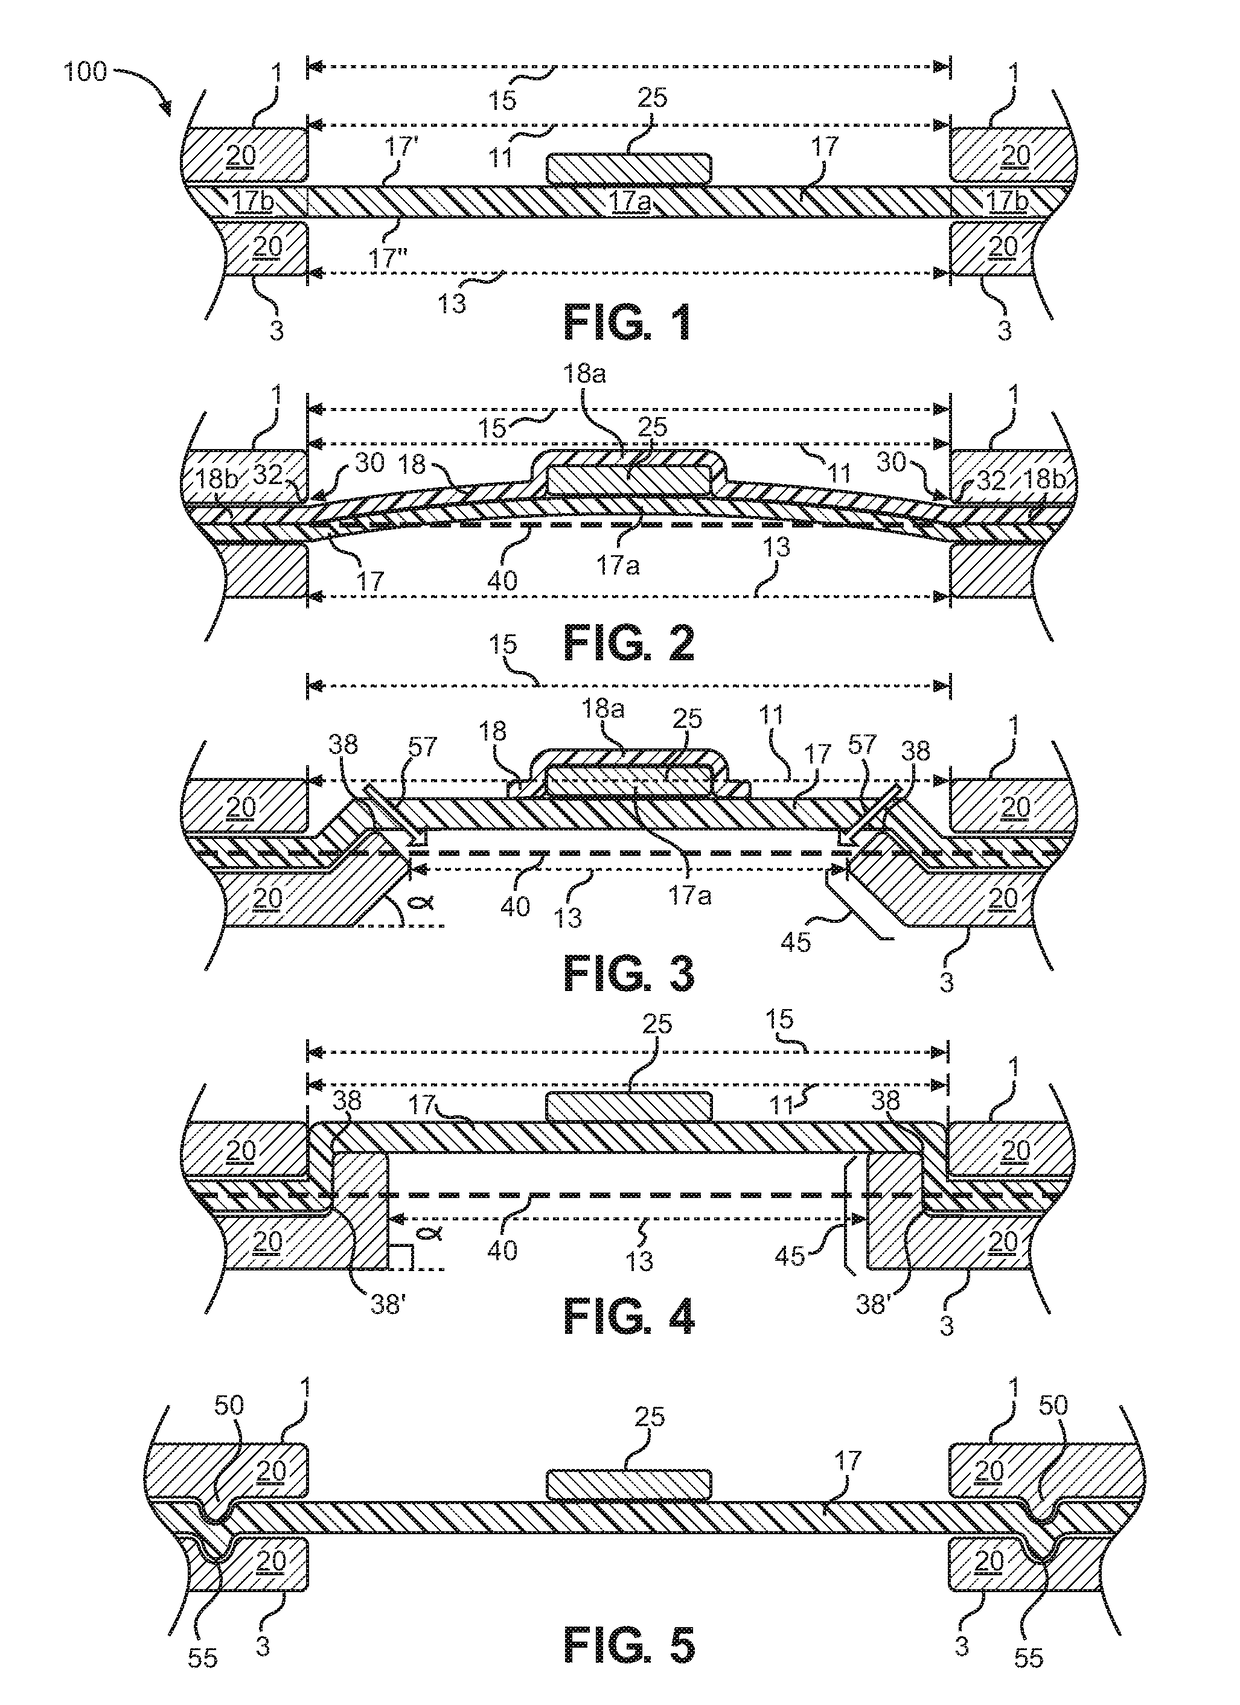 Suspension of a sample element with dimensional stability